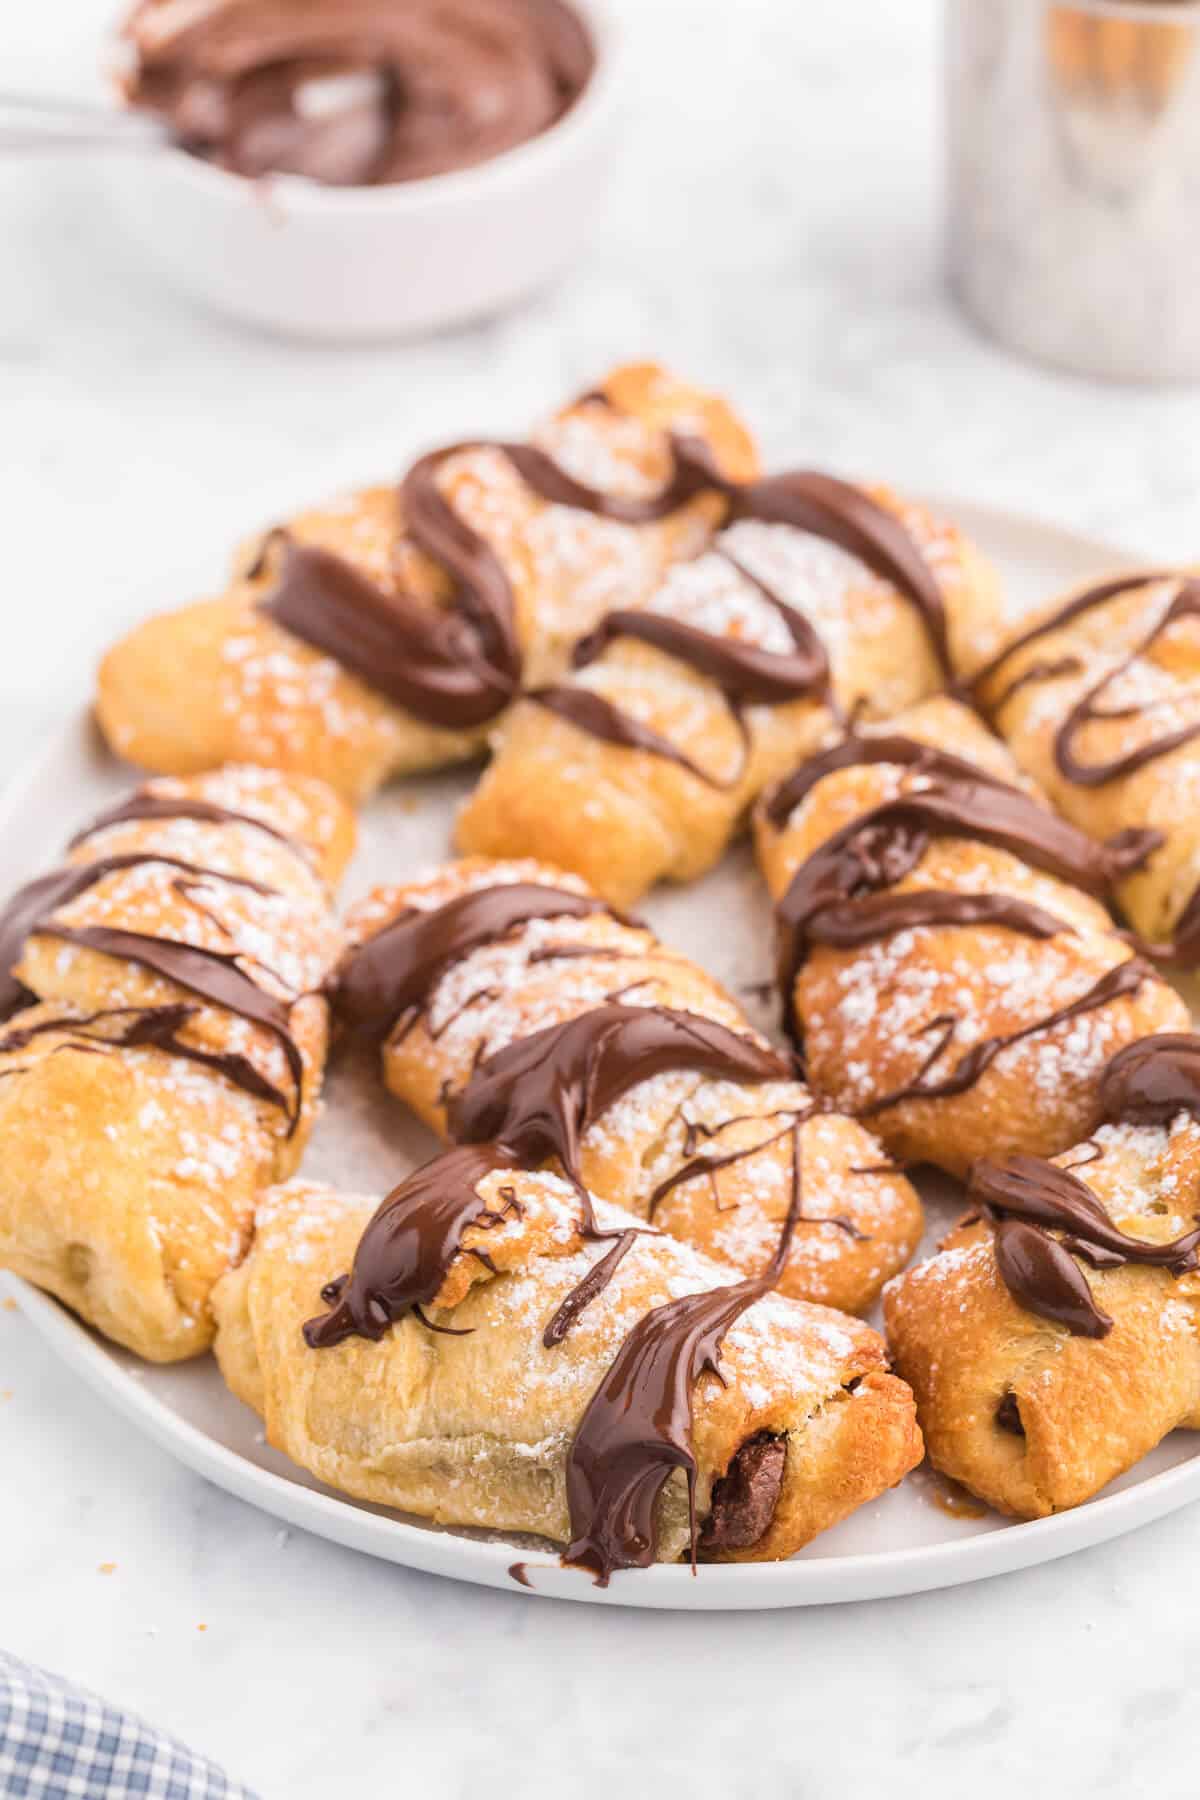 Air Fryer Chocolate Crescent Rolls Recipe - Make these chocolate stuffed crescent rolls in your air fryer. Wrap Pillsbury crescent roll dough around a spoonful of sweet and rich Nutella. Ready to eat in minutes! Such a delicious and easy dessert everyone loves.